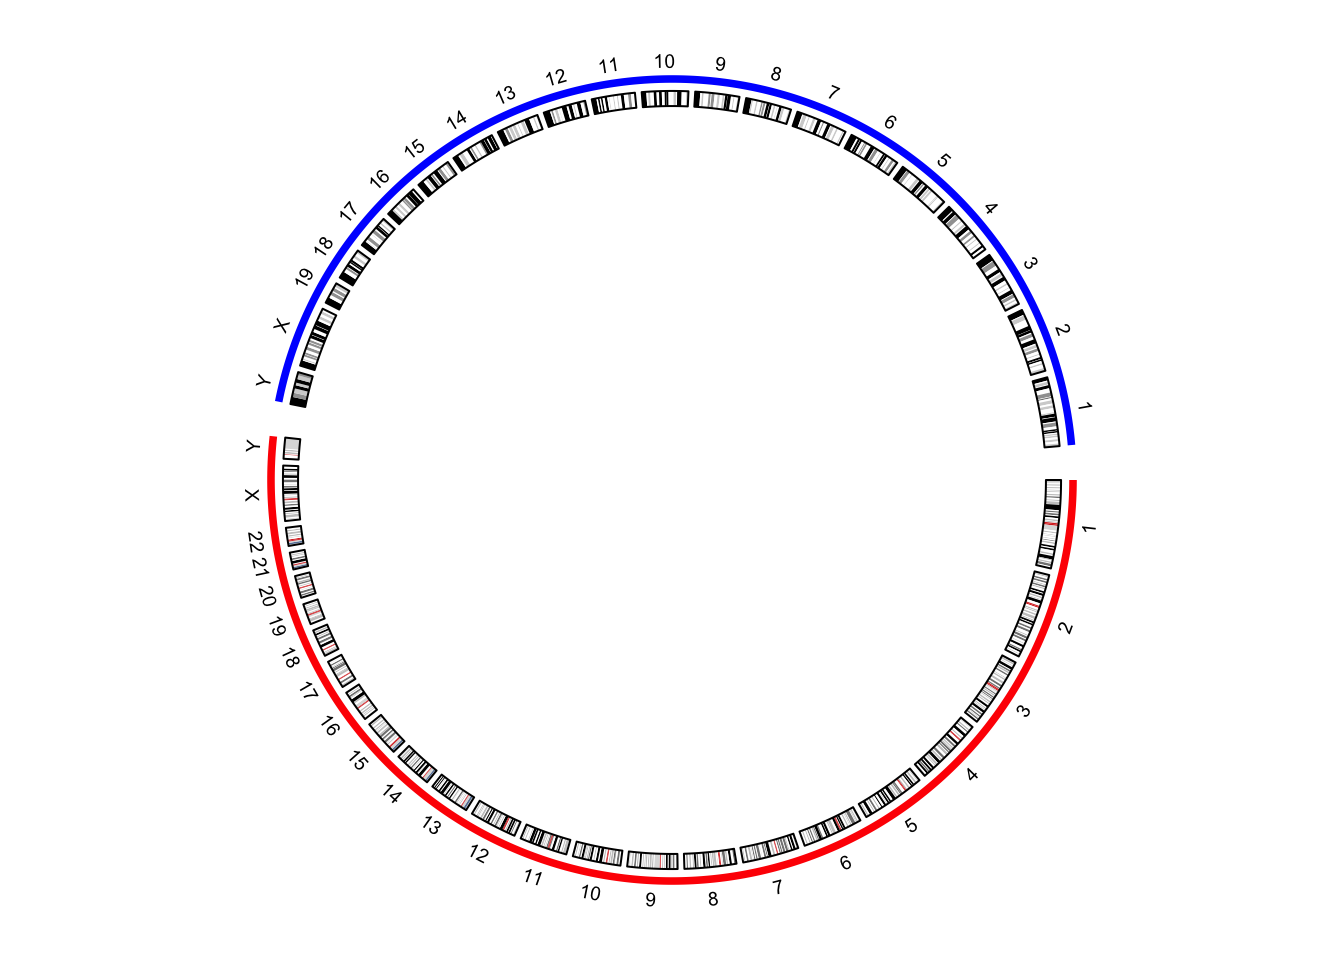 Improved visualization of the combined genome.